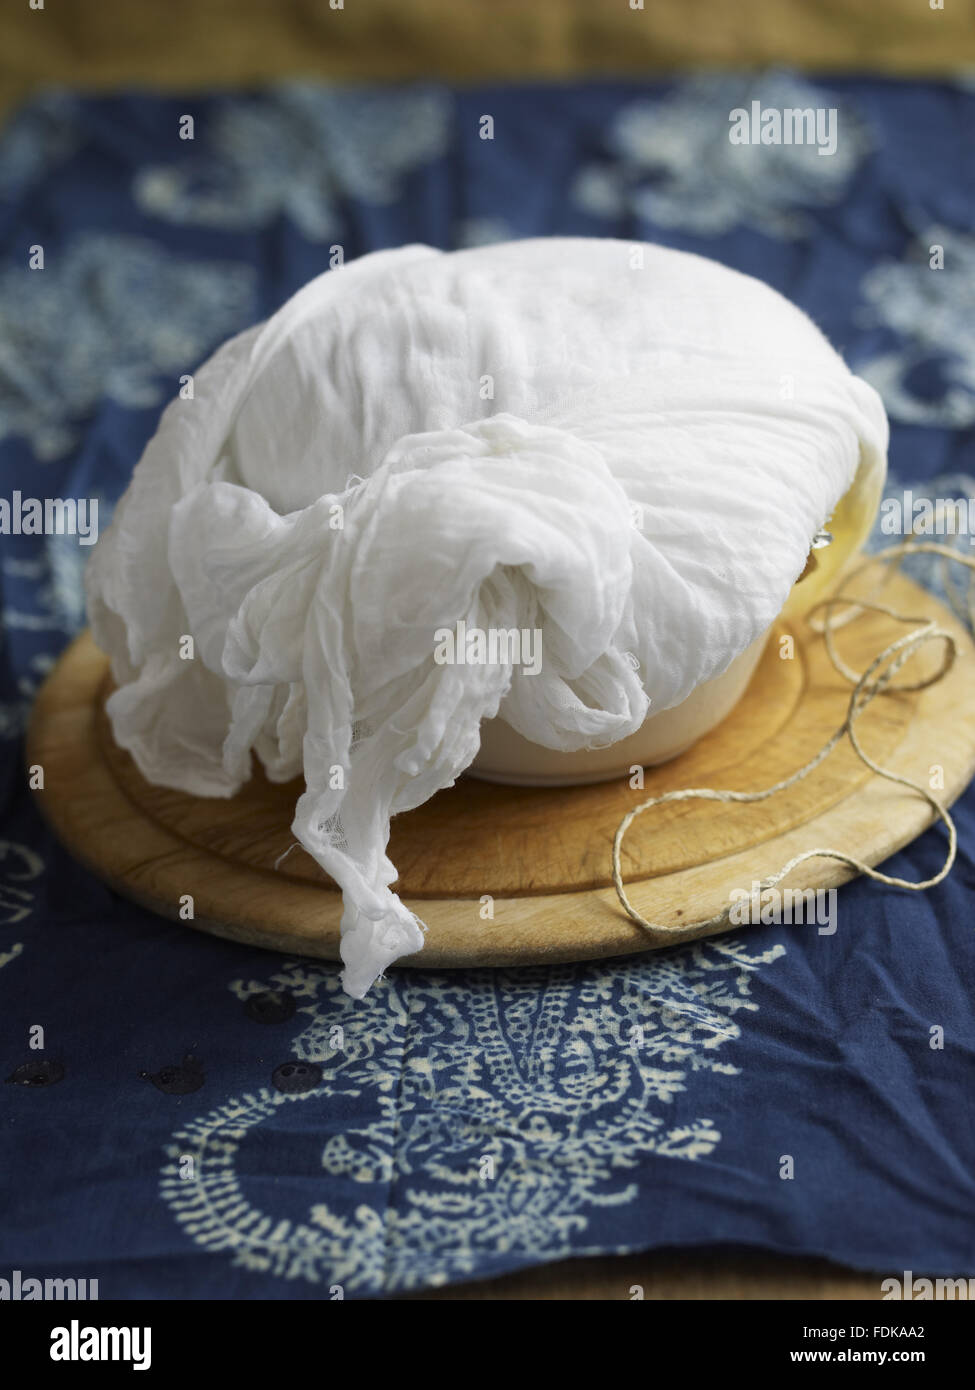 Beef pudding wrapped in a muslin, one of the traditional dishes served in National Trust restaurants. Stock Photo